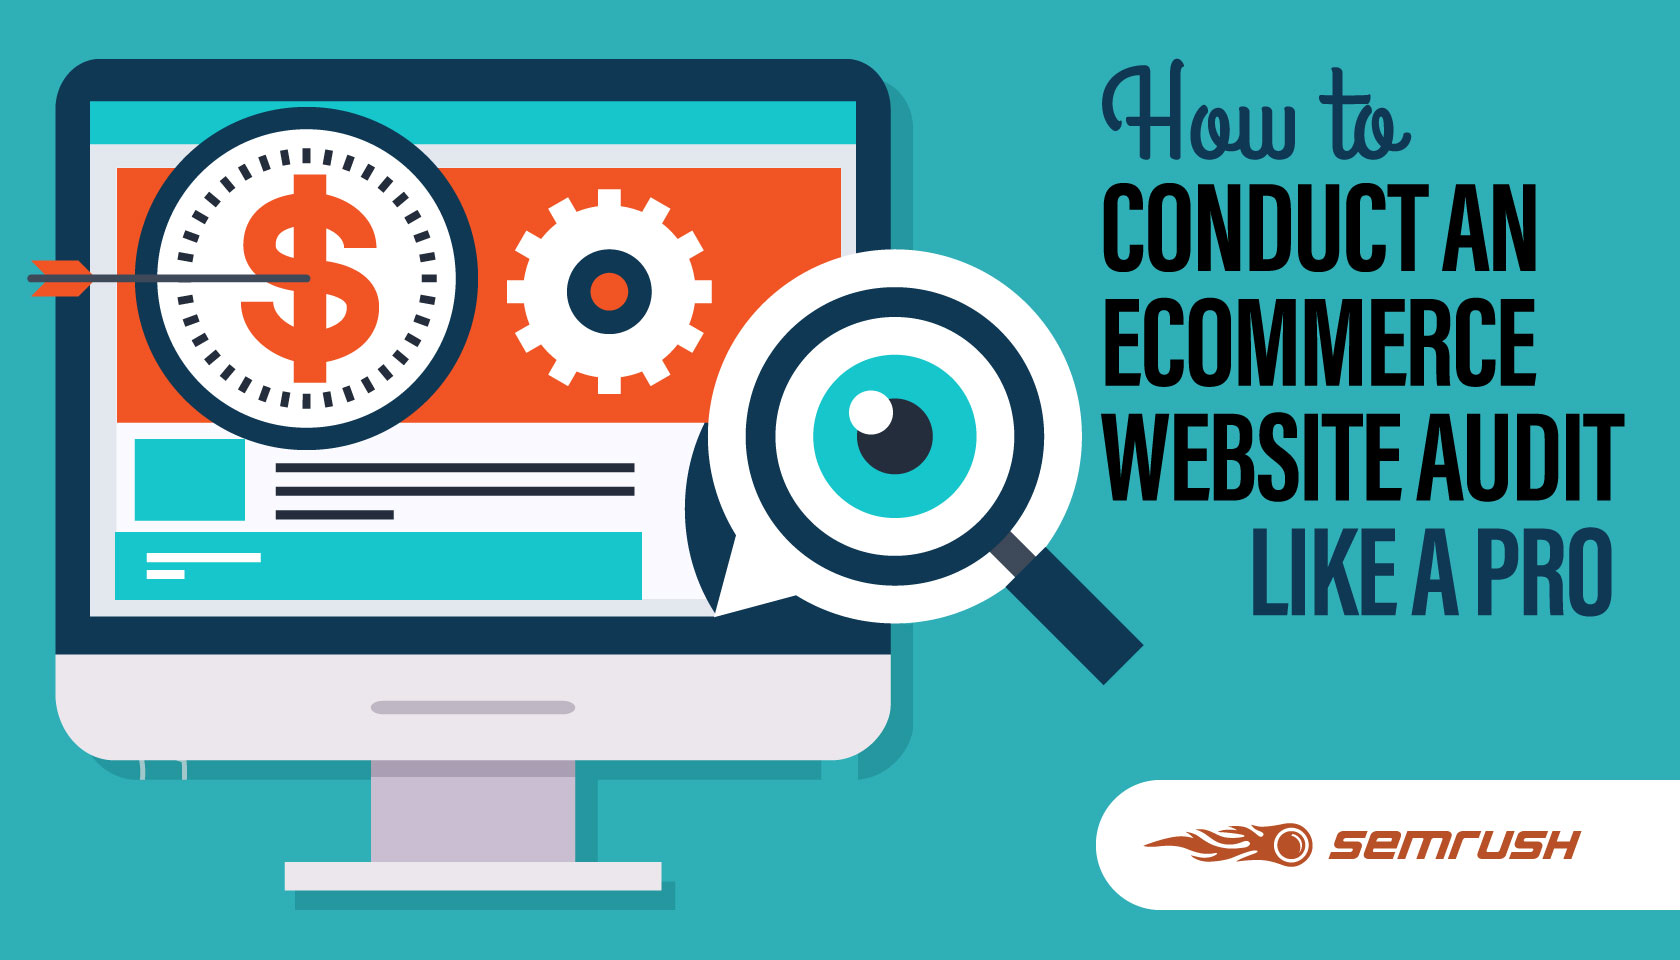 How to Conduct an Ecommerce Website Audit Like a Pro